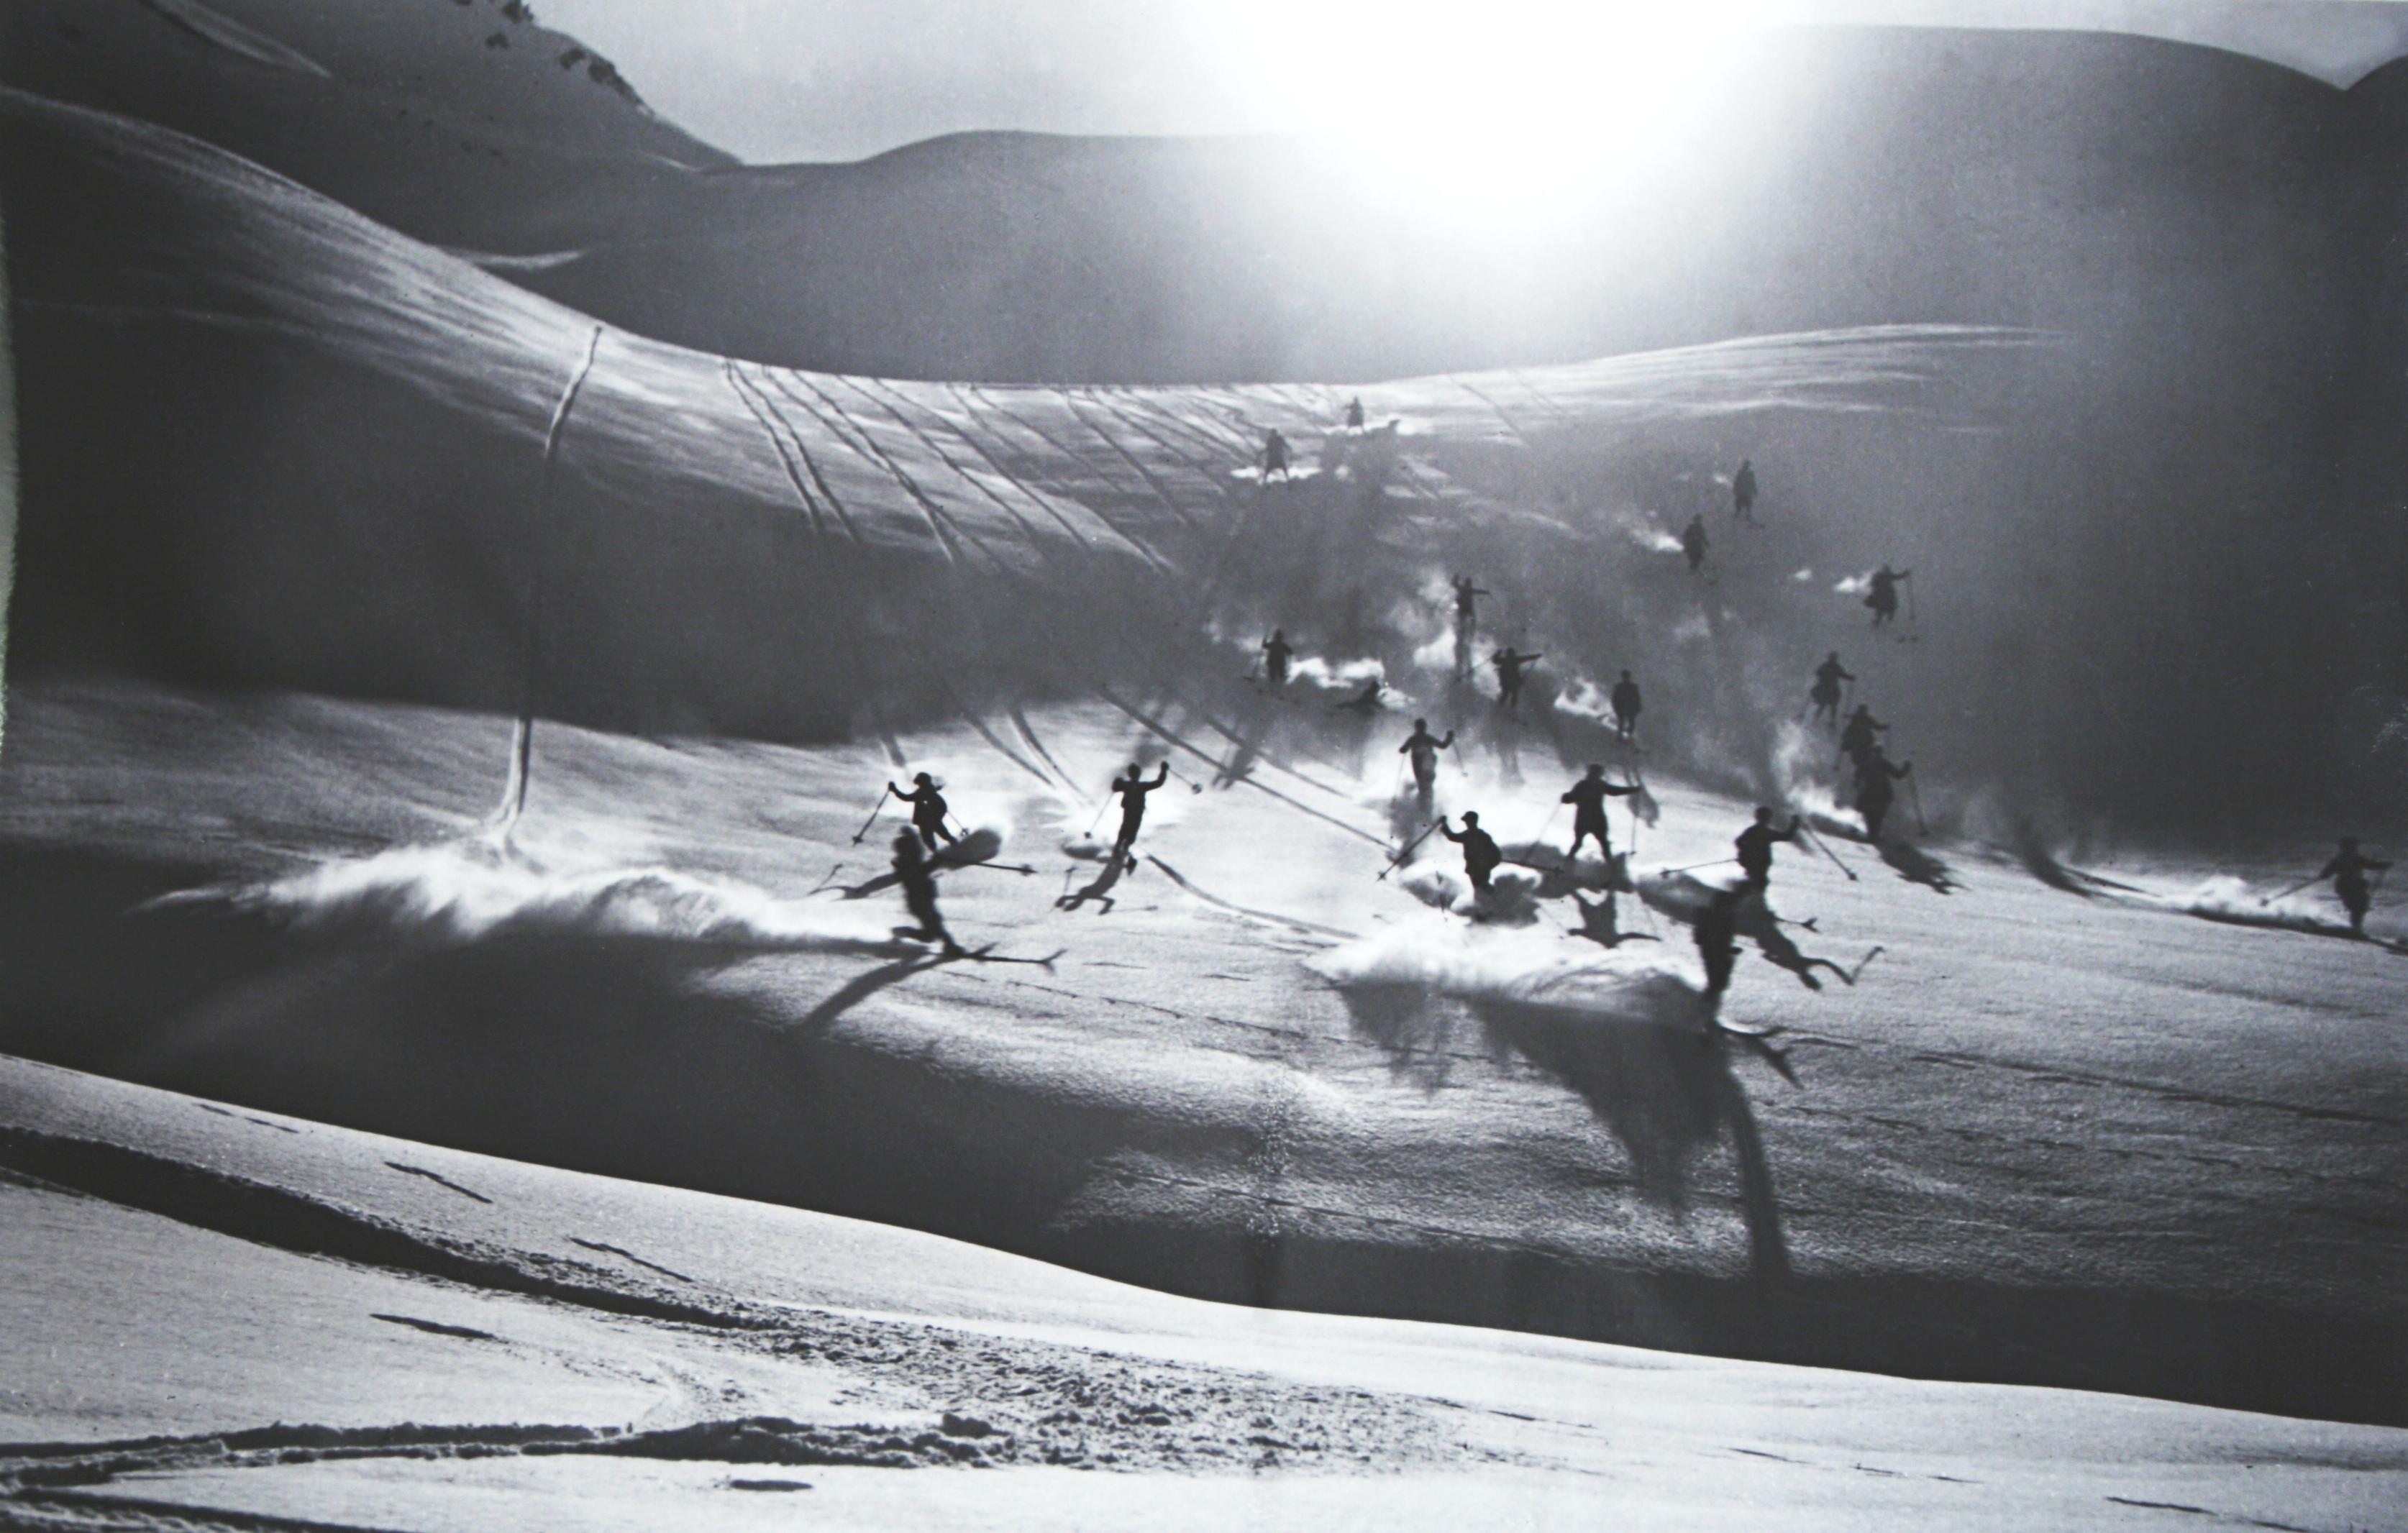 Vintage, Alpine ski photograph.
'Happy Skiers', a new mounted black and white photographic image after an original 1930s skiing photograph. Black and white alpine photos are the perfect addition to any home or ski lodge. Prior to being a